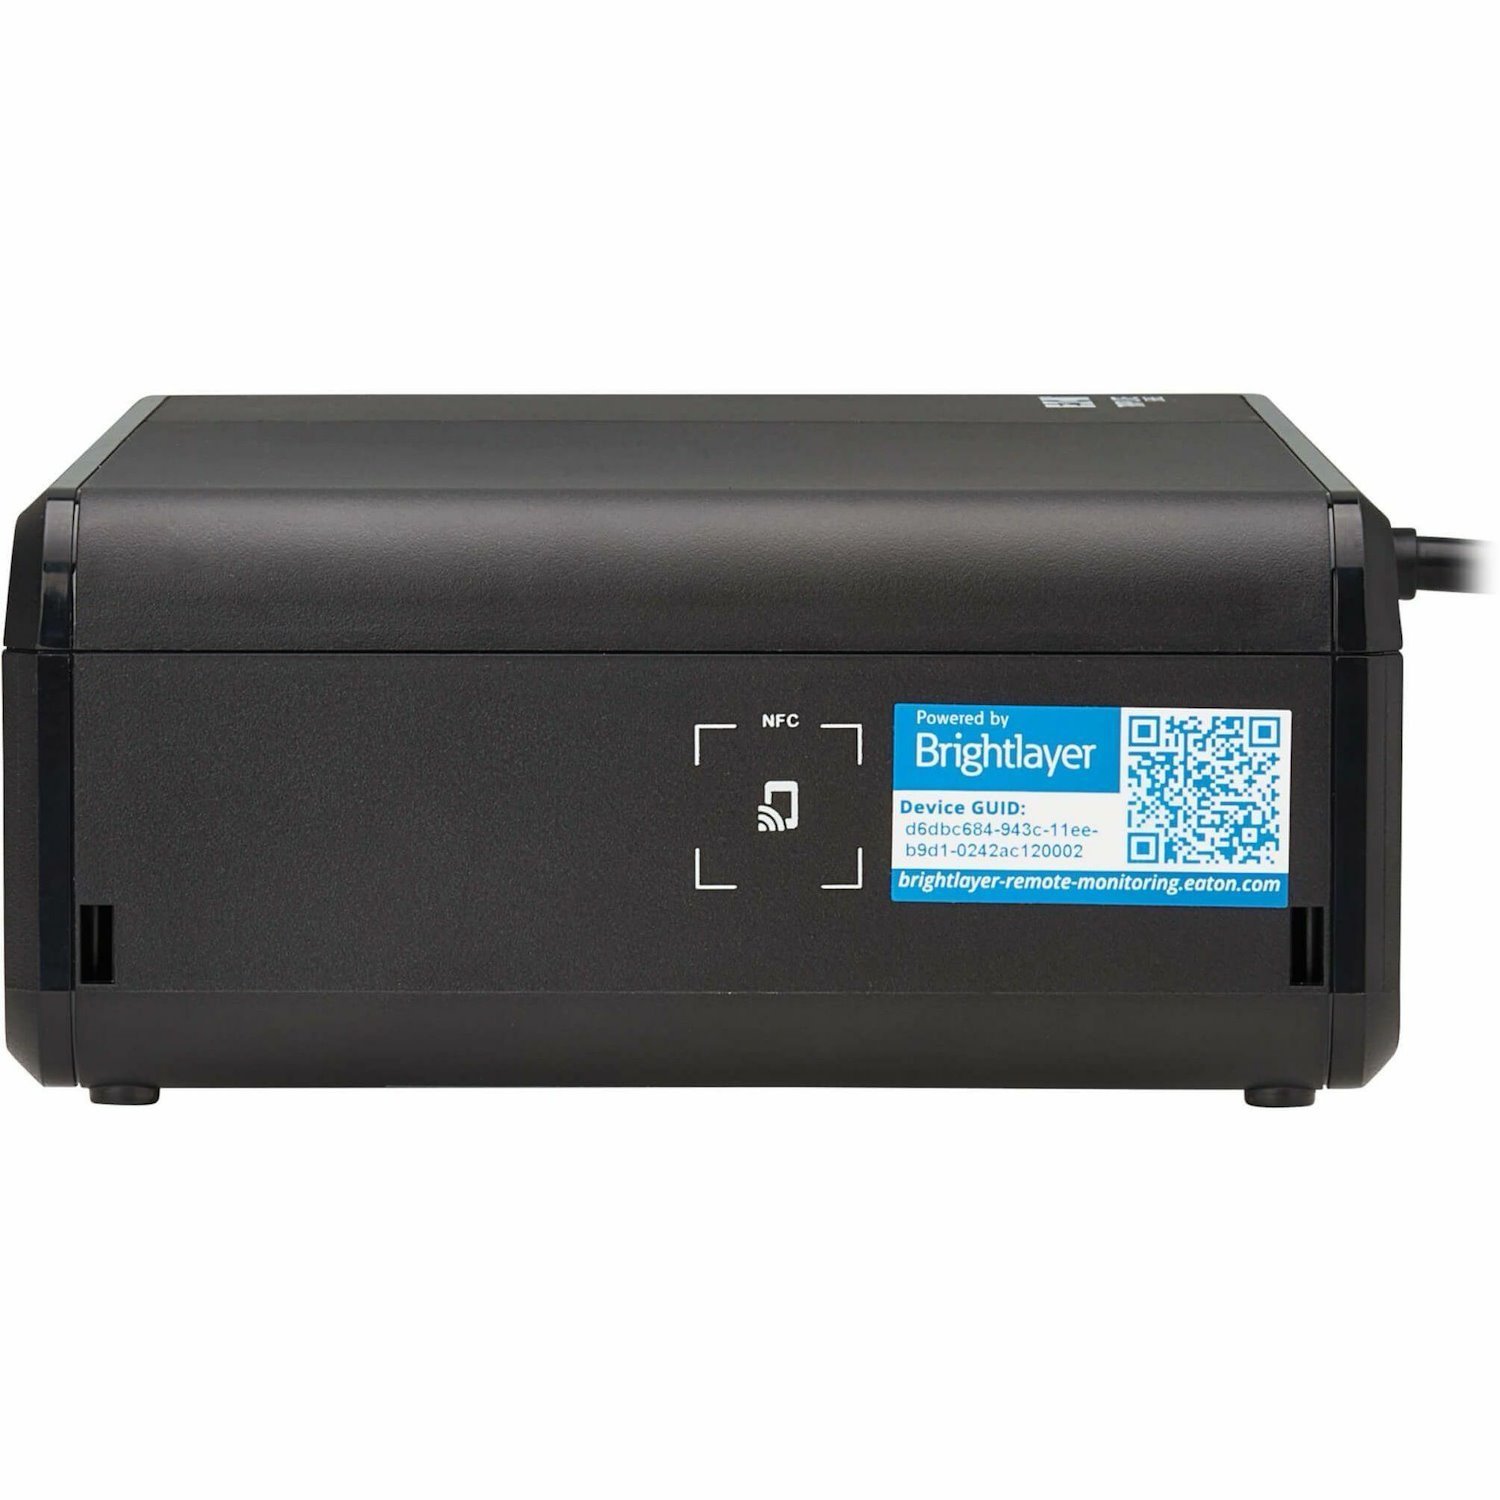 Eaton Tripp Lite Series 850VA 450W 120V Standby Cloud-Connected UPS with Remote Monitoring 5 NEMA 5-15R Battery Backup